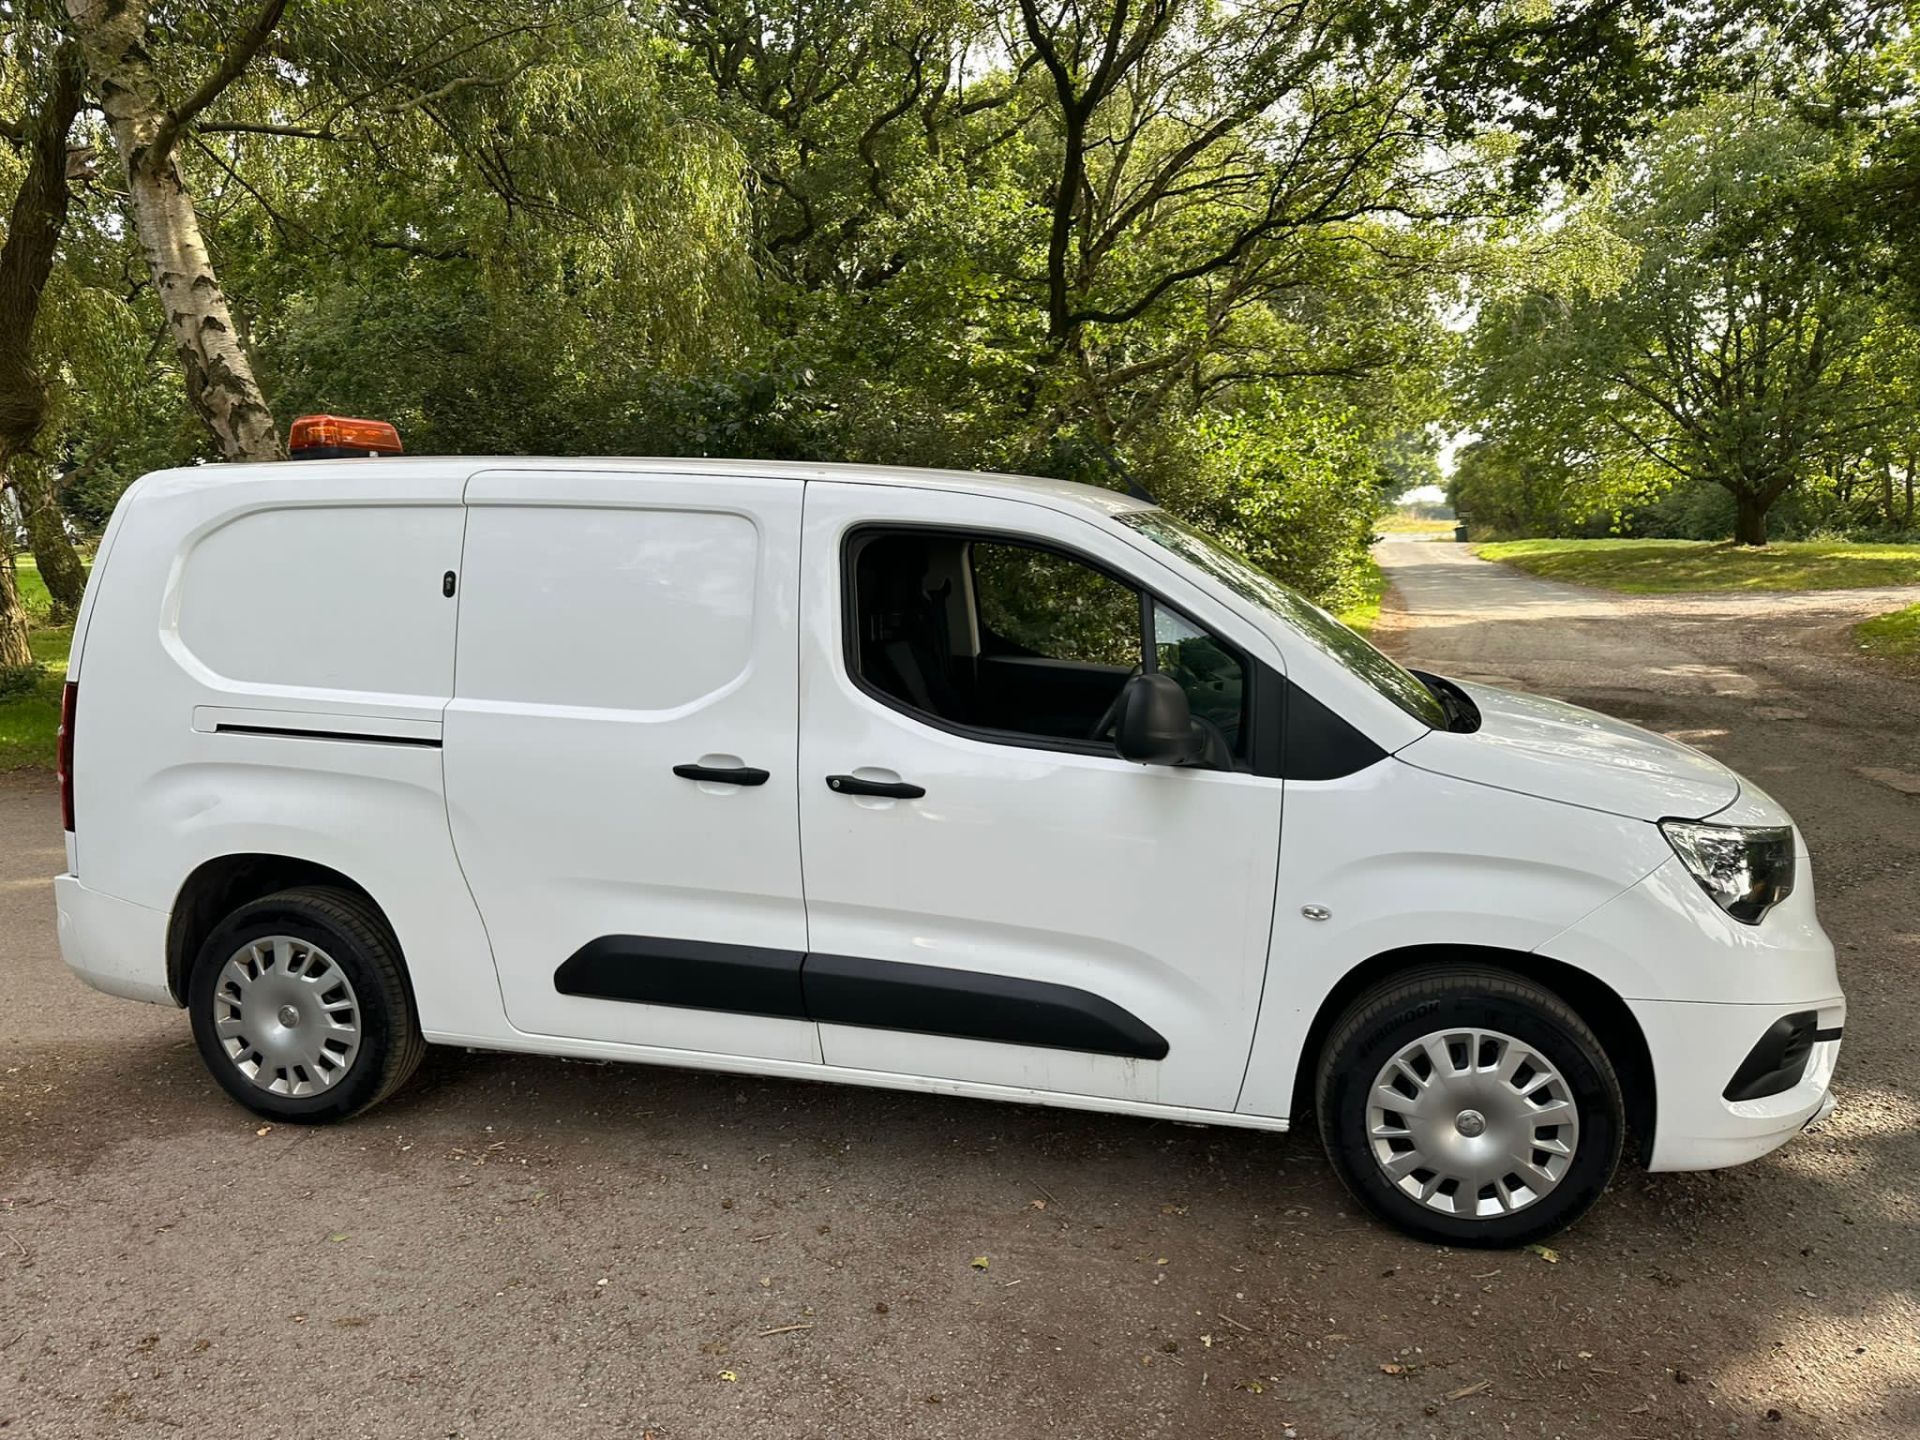 2020 20 Vauxhall combo sportive Panel van - 73k miles - Euro 6 - Lwb - Air con - ply lined - Image 8 of 10